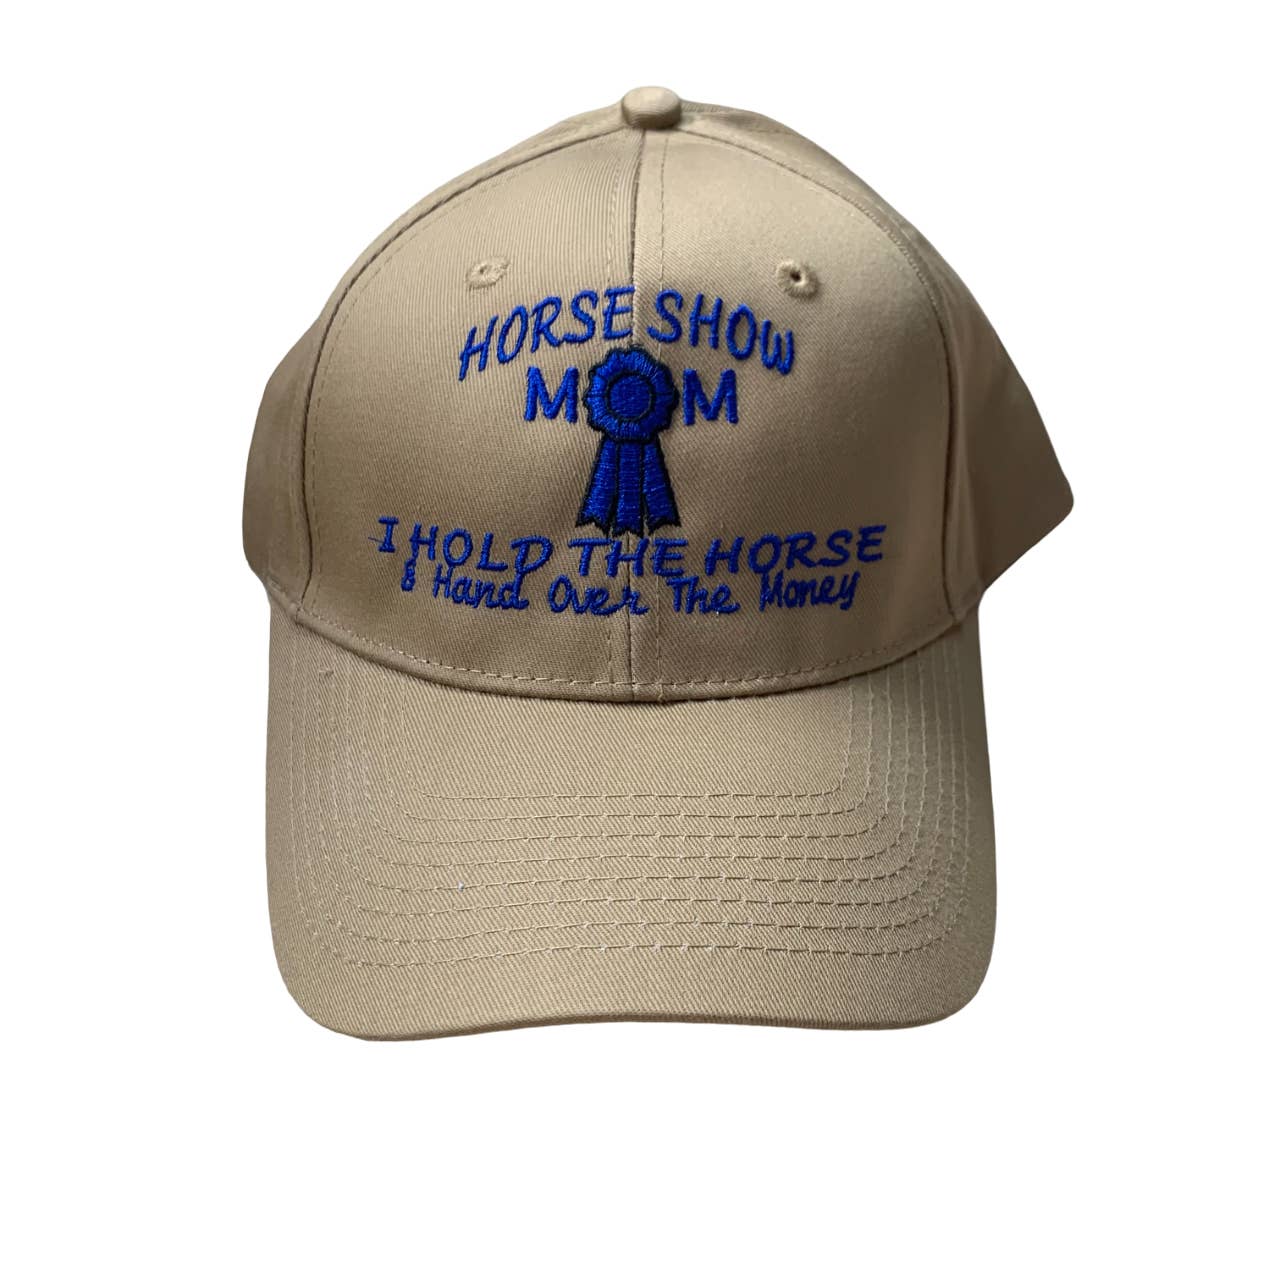 'Horse Show Mom' Embroidered Equestrian Baseball Cap - One Size